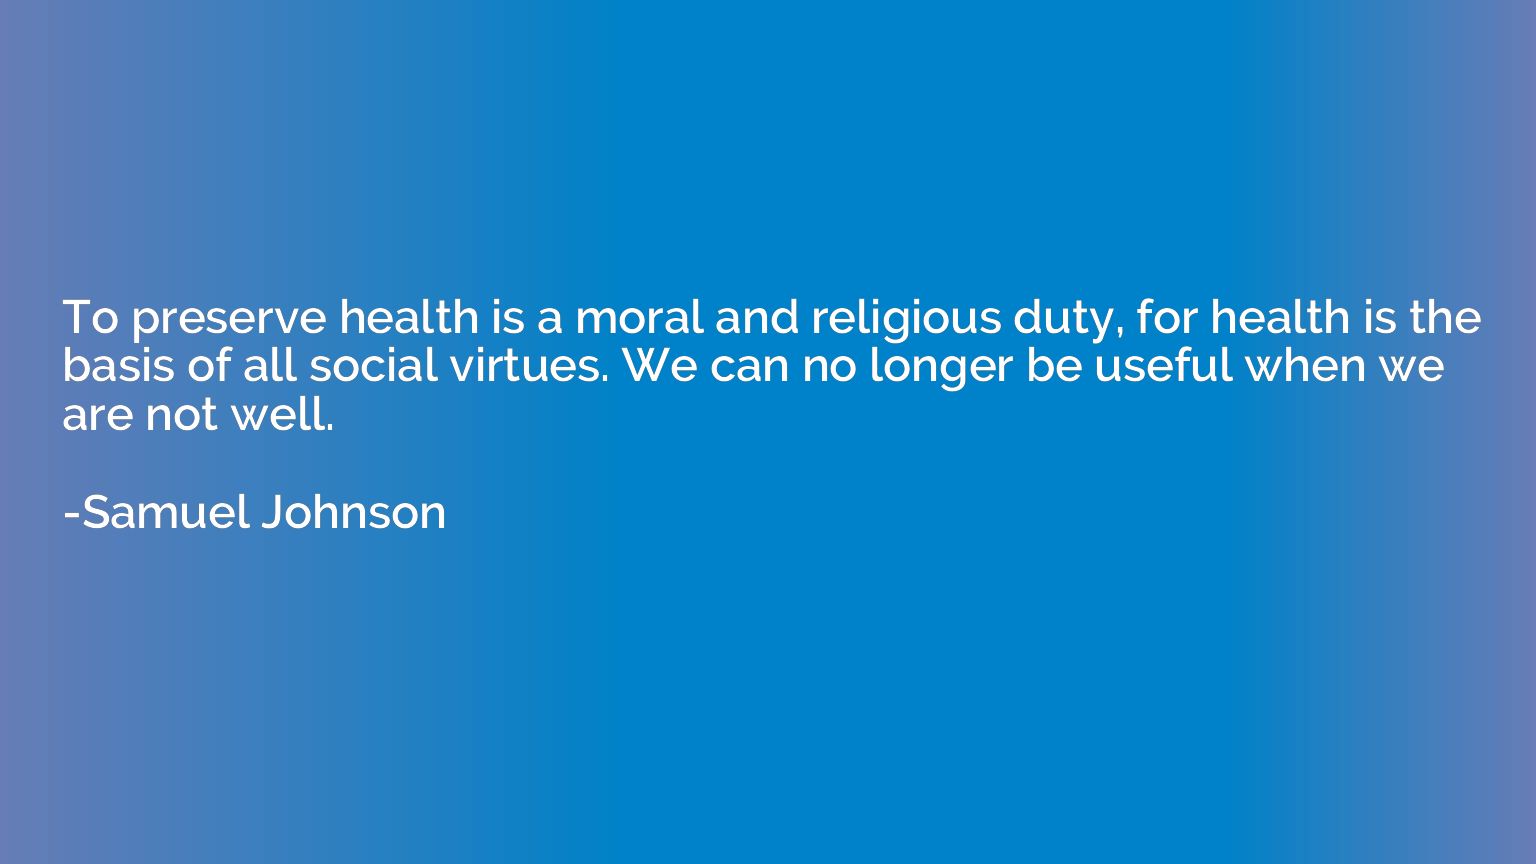 To preserve health is a moral and religious duty, for health